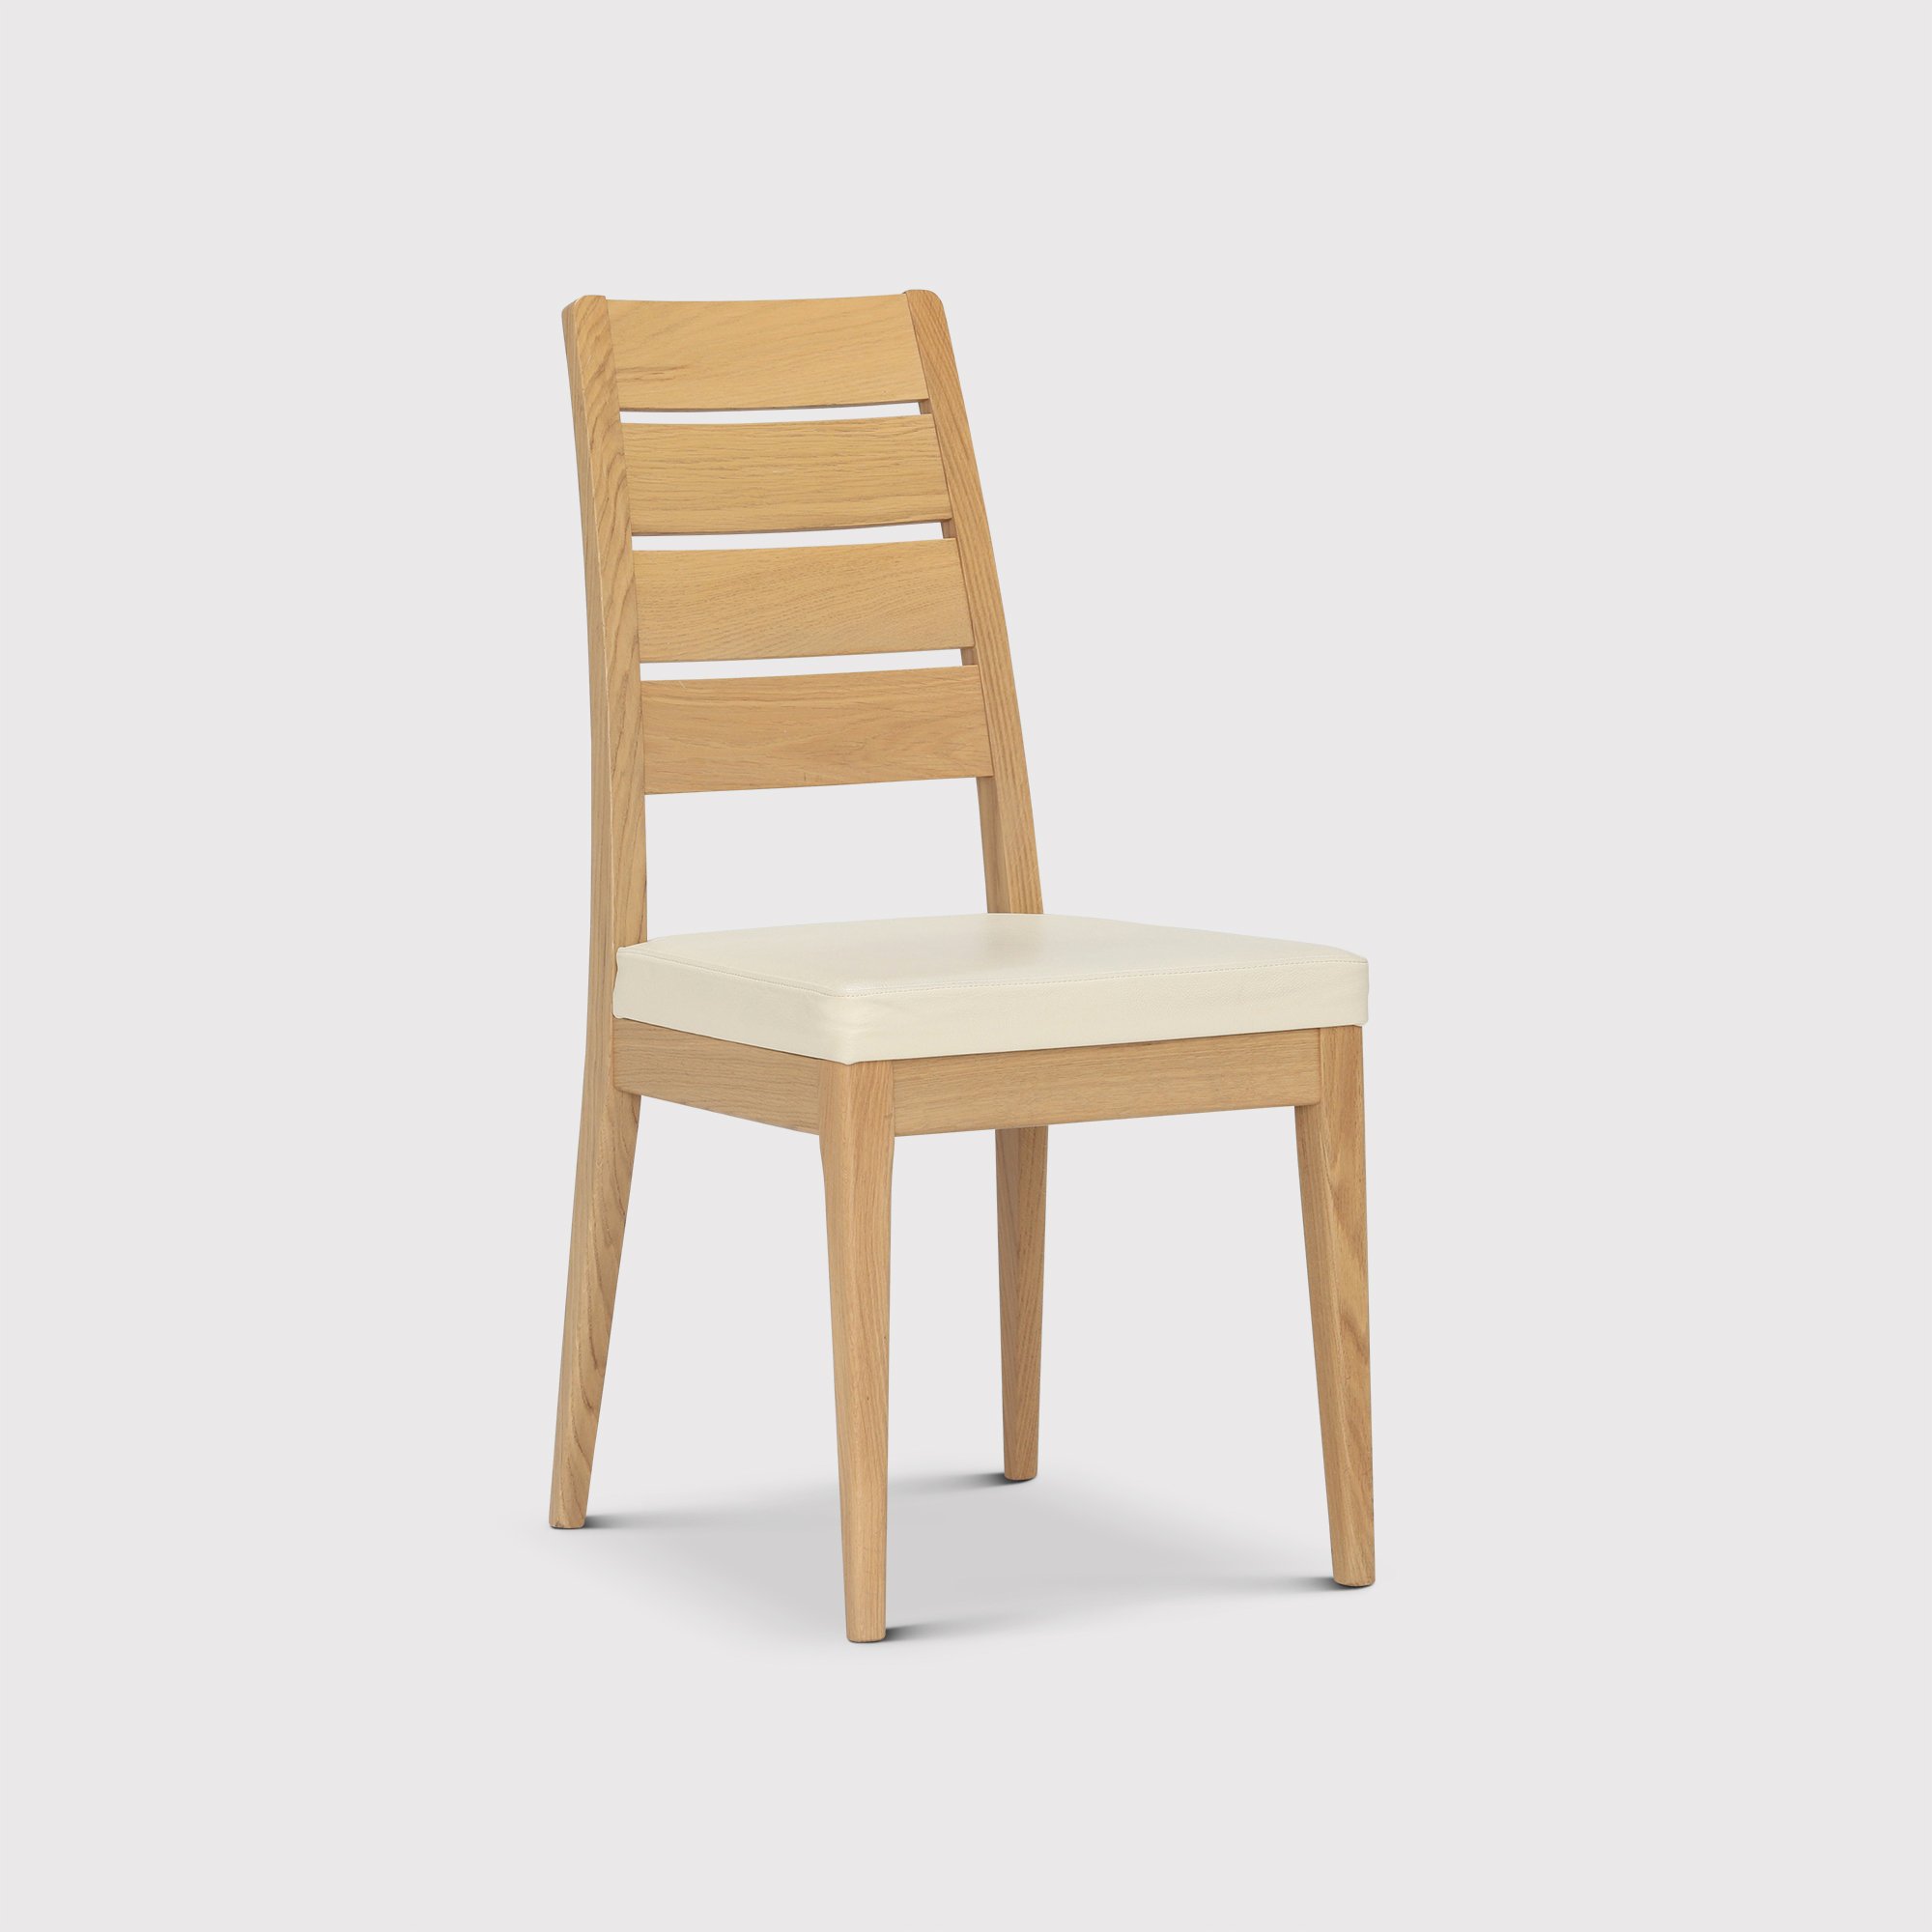 Ercol Romana Dining Chair, White Leather | Barker & Stonehouse